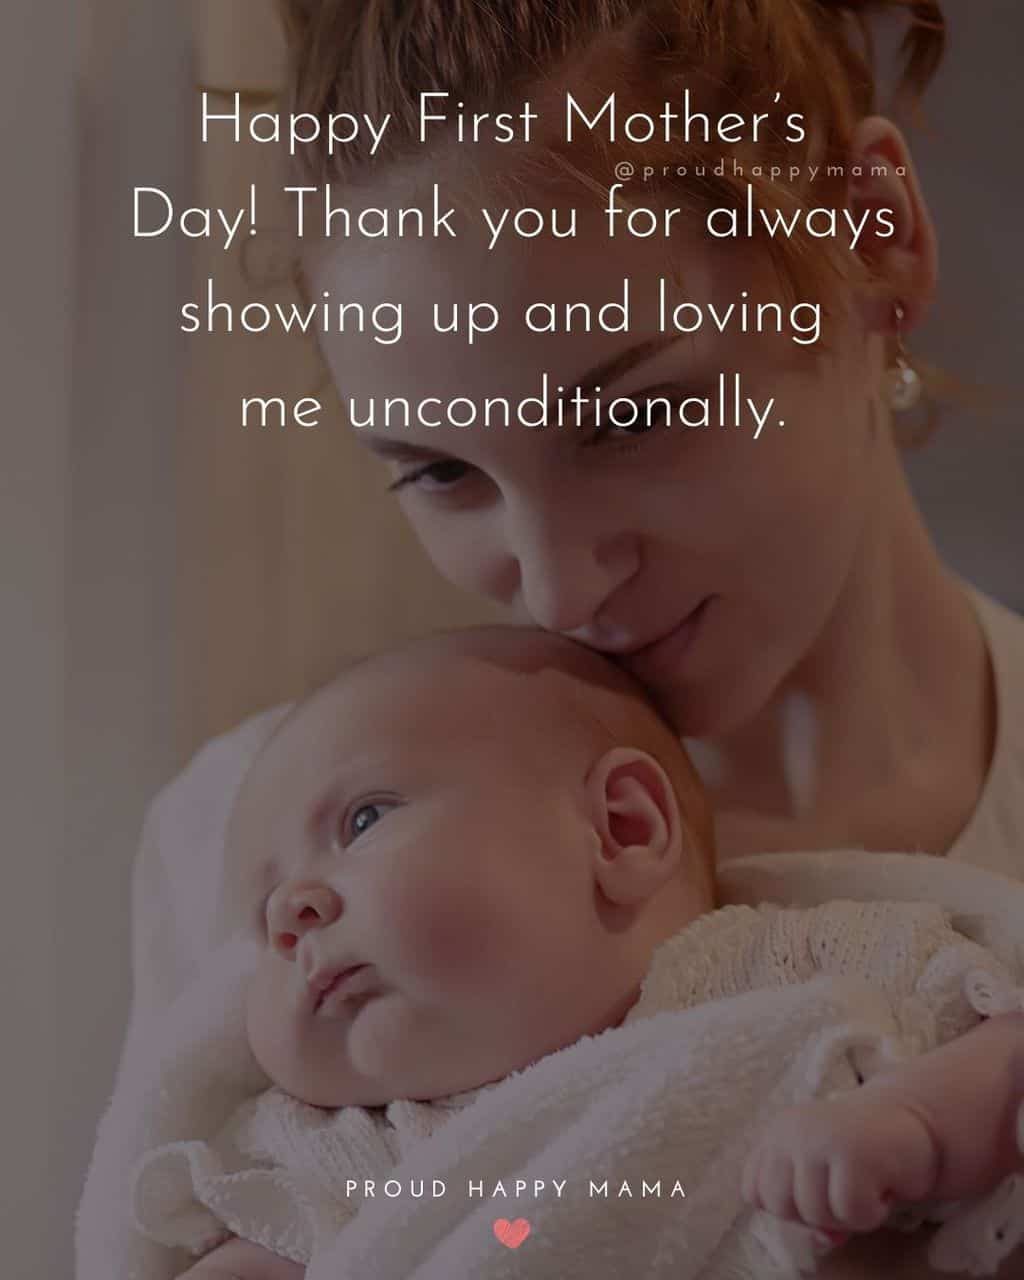 First Mothers Day Quotes - Happy First Mother’s Day! Thank you for always showing up and loving me unconditionally.’